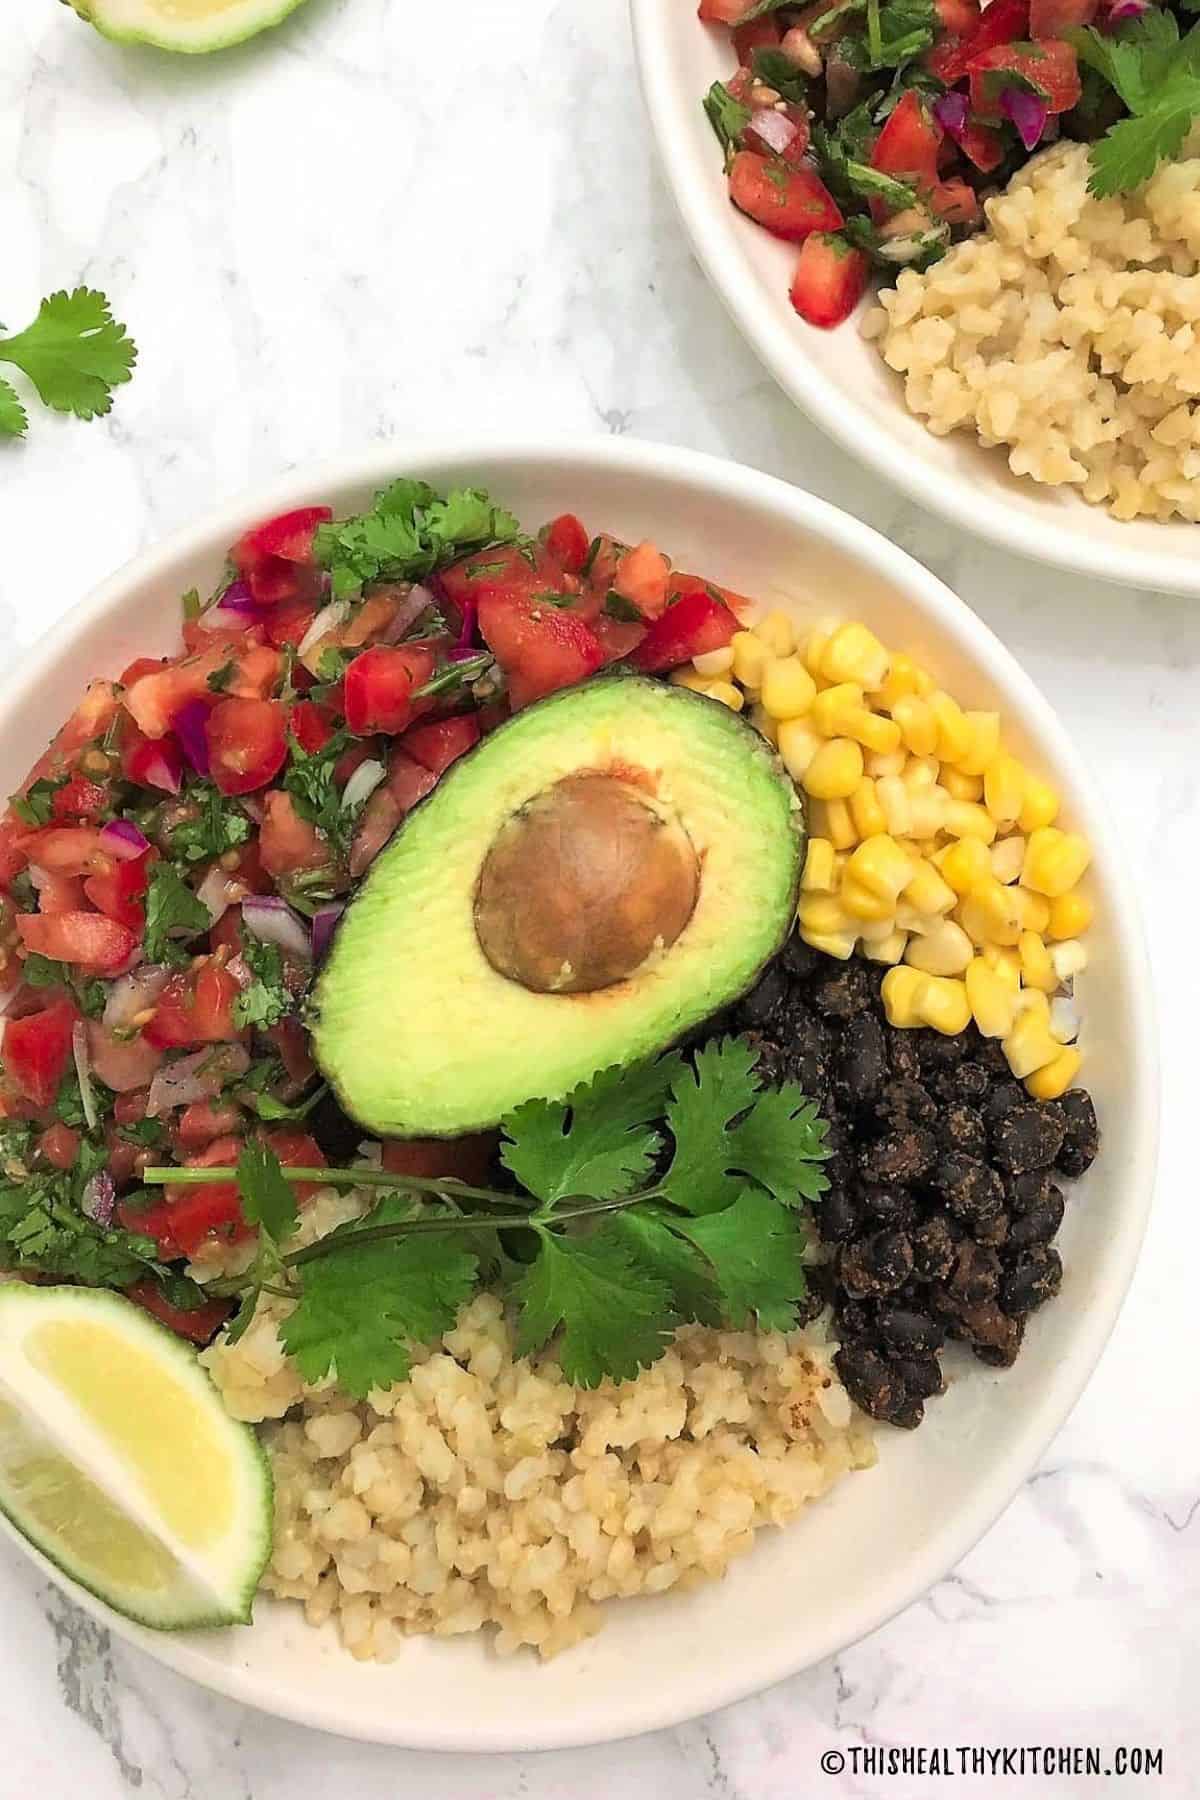 Mexican buddha bowl with rice, beans, corn, tomato salad, avocado and cilantro on top.